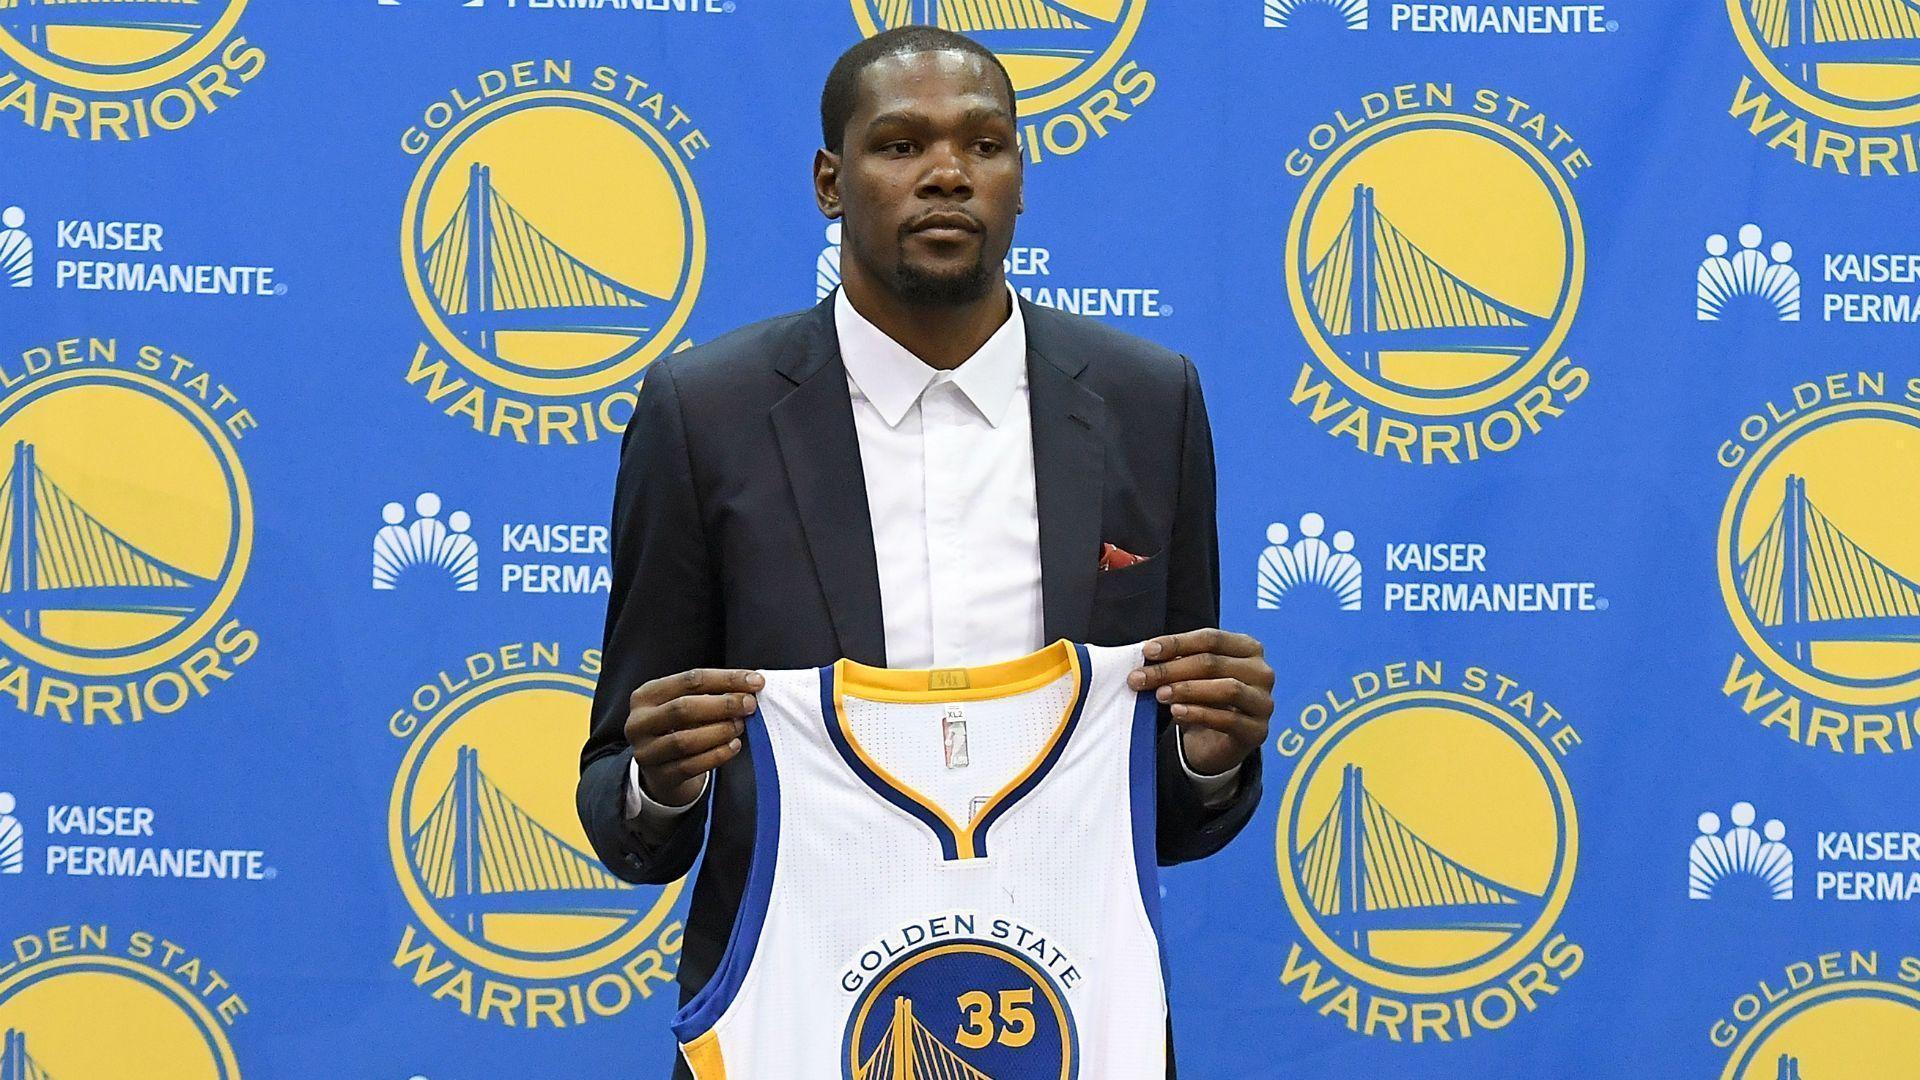 Kevin Durant should rake in way more money and fame with Warriors